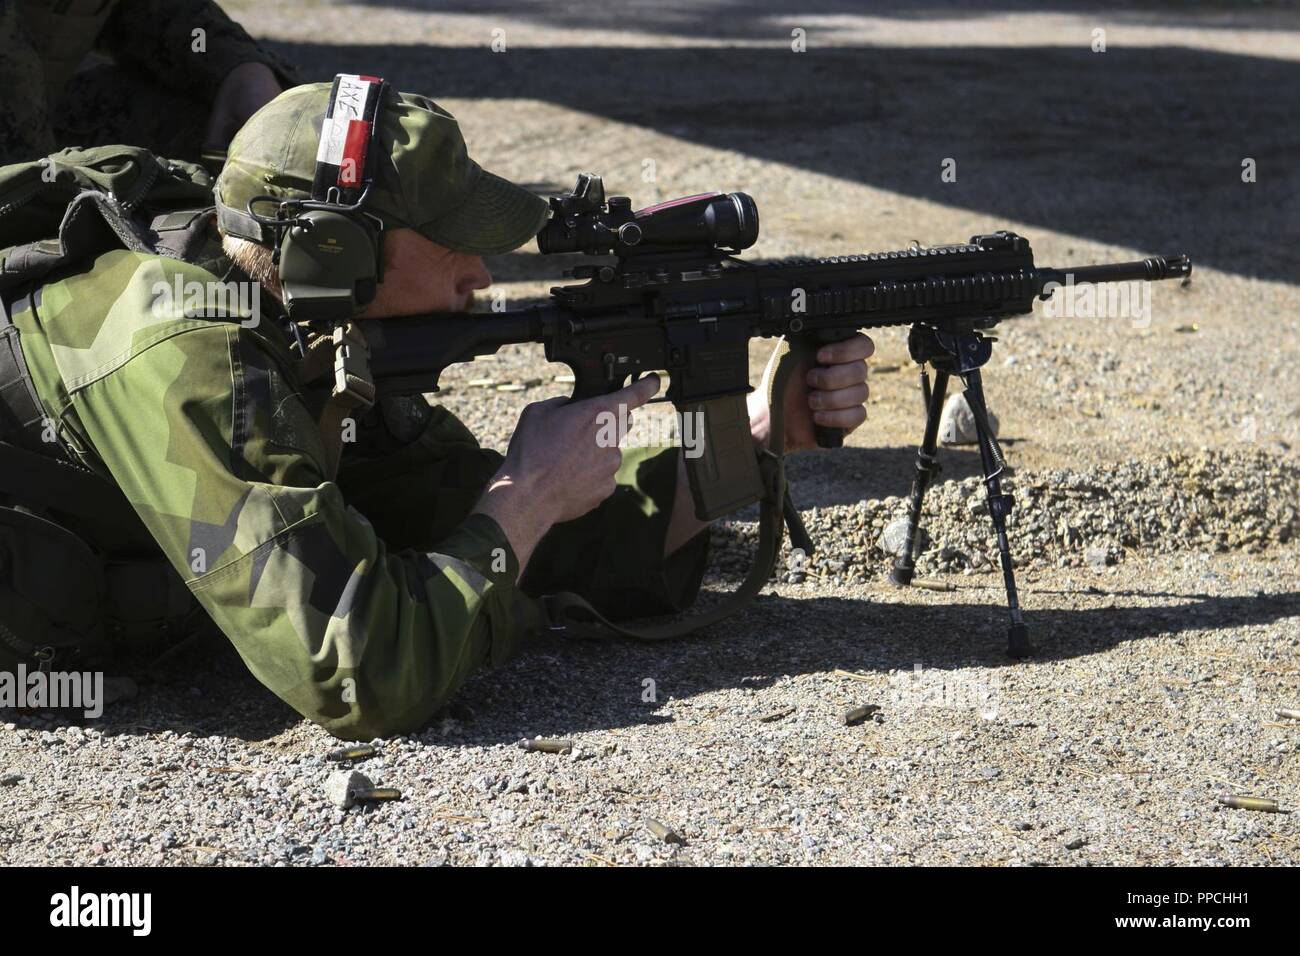 A Swedish Coastal Ranger with 1st Marine Regiment shoots the Marine Corps M27 Infantry Automatic Rifle during the cross-training range at Exercise Archipelago Endeavor aboard Berga Naval Base, Harsfjarden, Sweden, Aug. 22, 2018. Exercise Archipelago Endeavor is an integrated field training exercise that increases operational capability and enhances strategic cooperation between the U.S. Marines and Swedish forces. Stock Photo